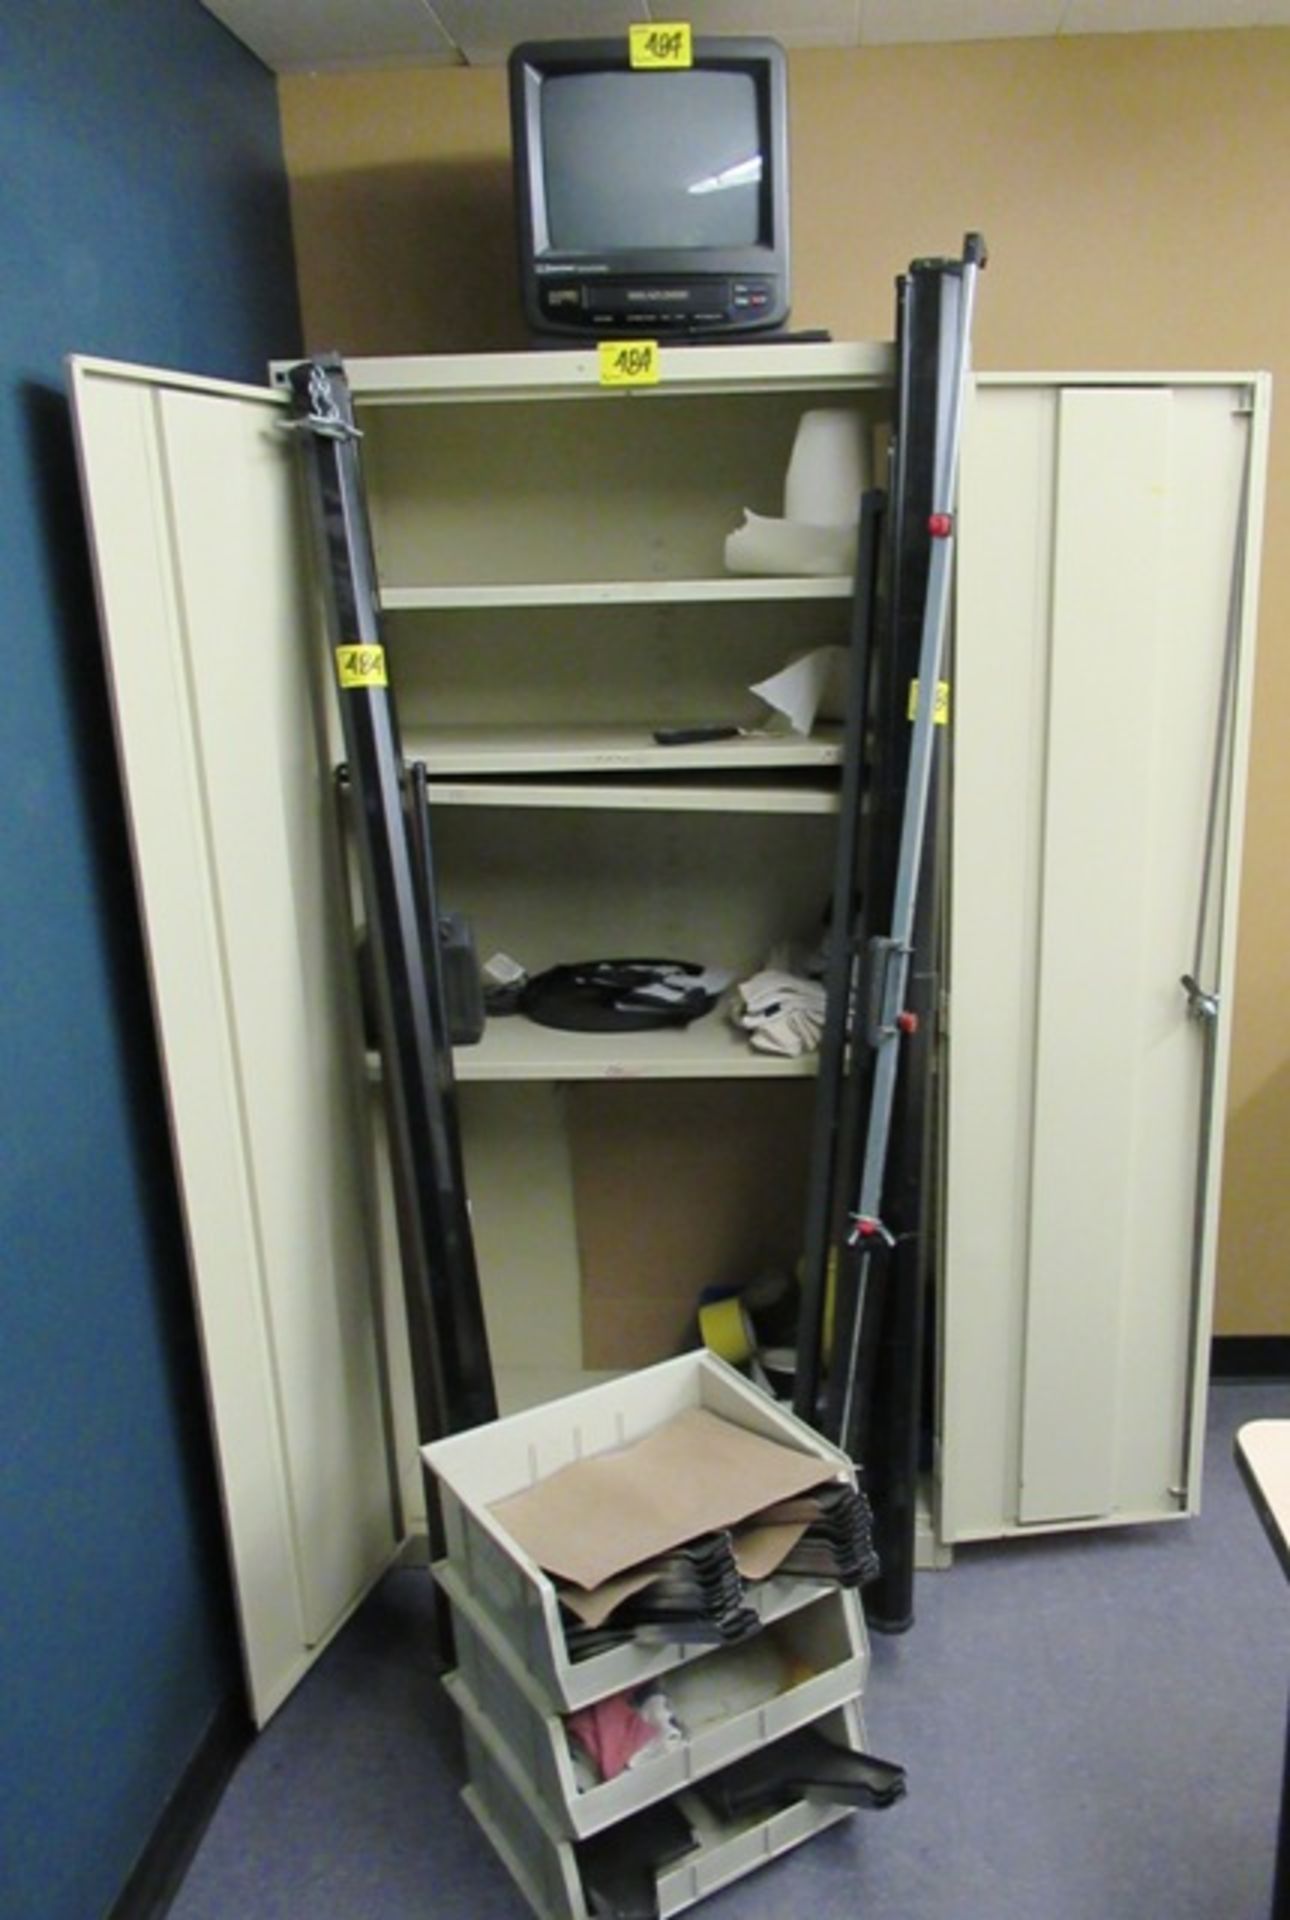 LOT 2 DR. METAL STORAGE CABINET, 3 PROJECTOR SCREENS, TV, WALL MOUNTED WHITEBOARD - Image 2 of 3